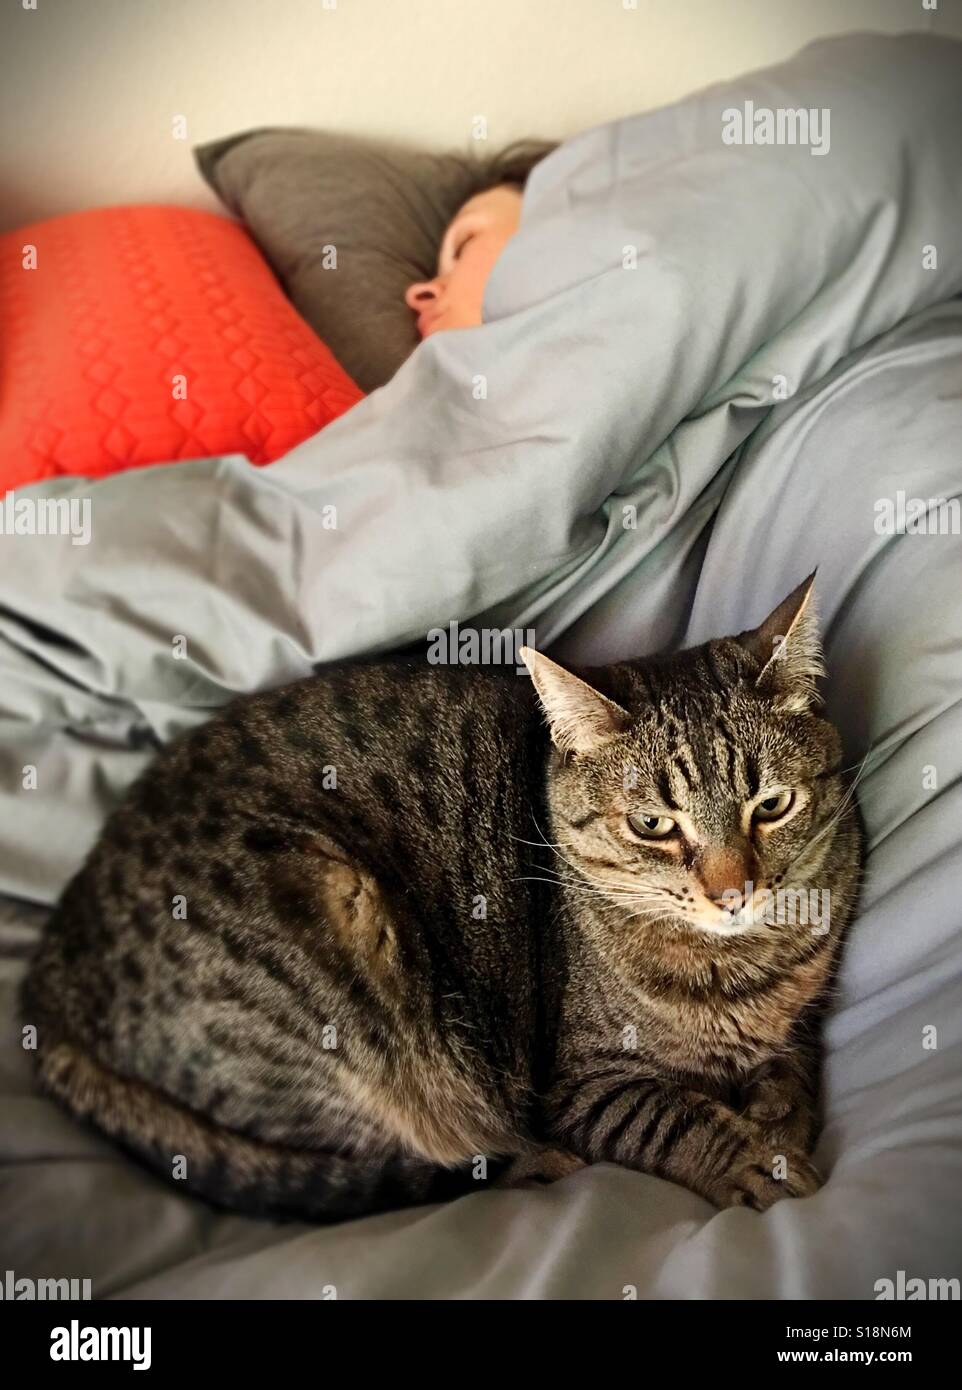 A cat curled up next to a sleeping woman. Stock Photo